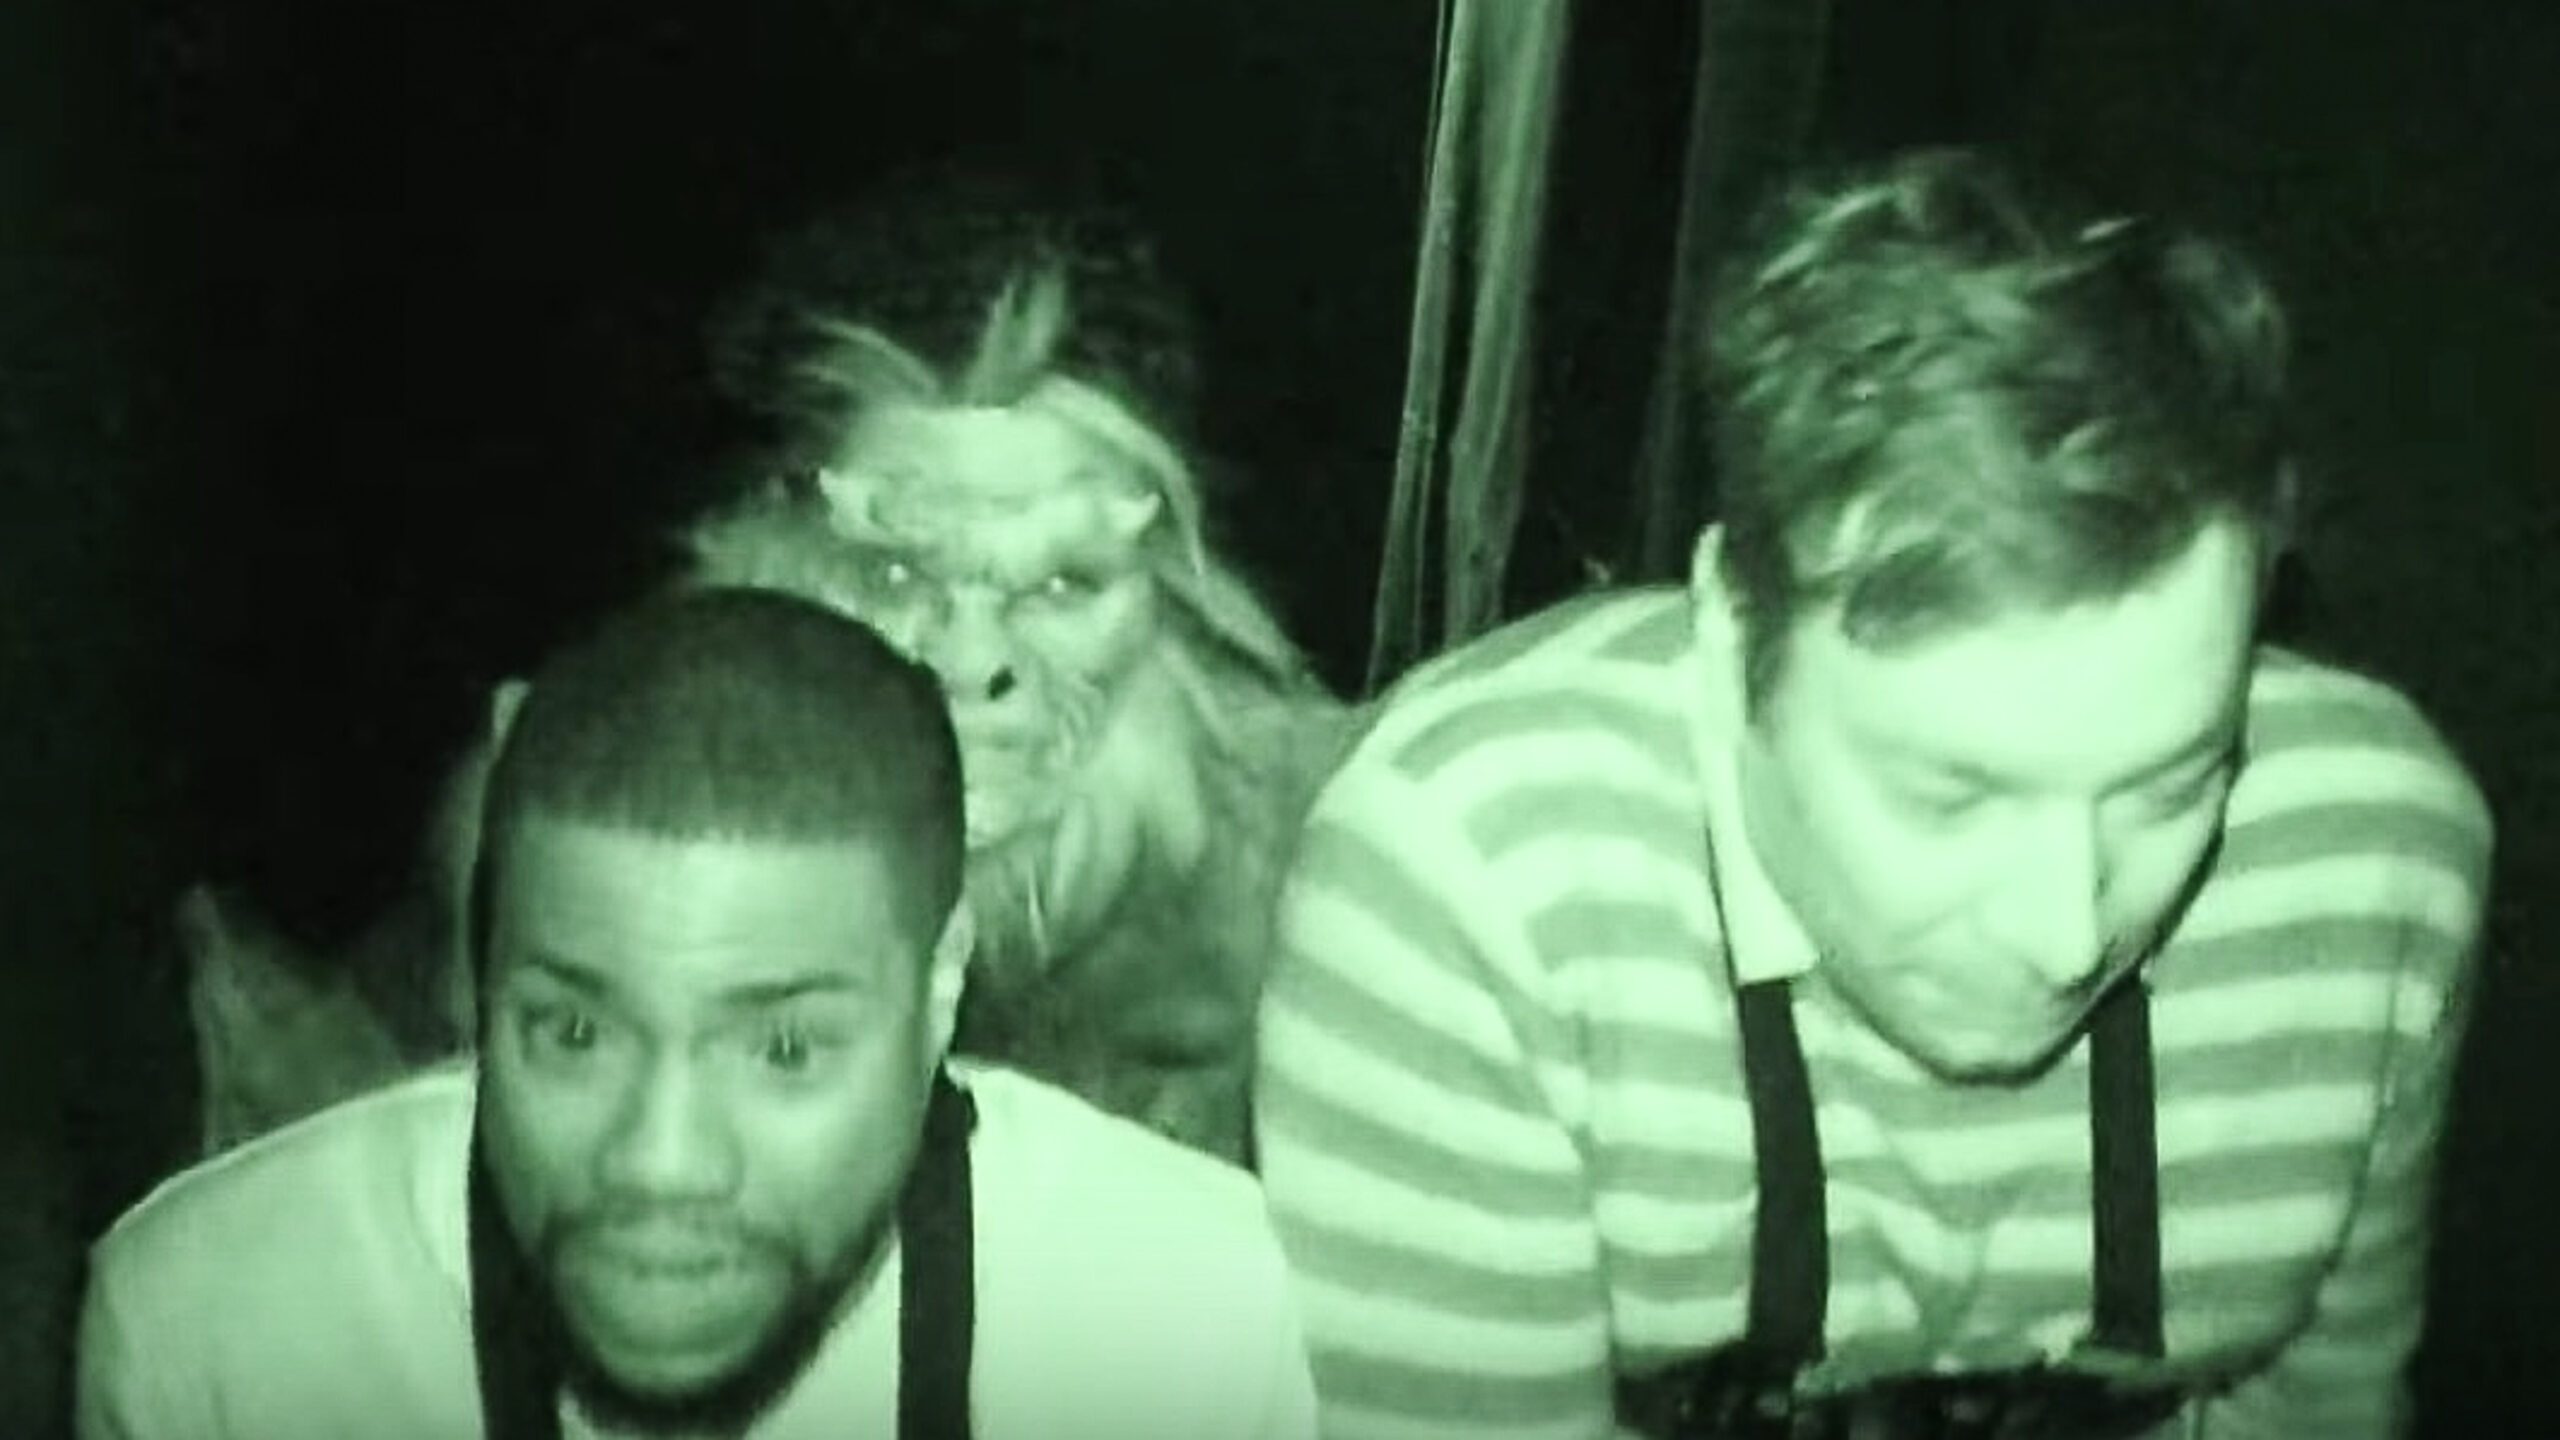 WATCH: Kevin Hart, Jimmy Fallon visit ‘NY’s scariest haunted house’